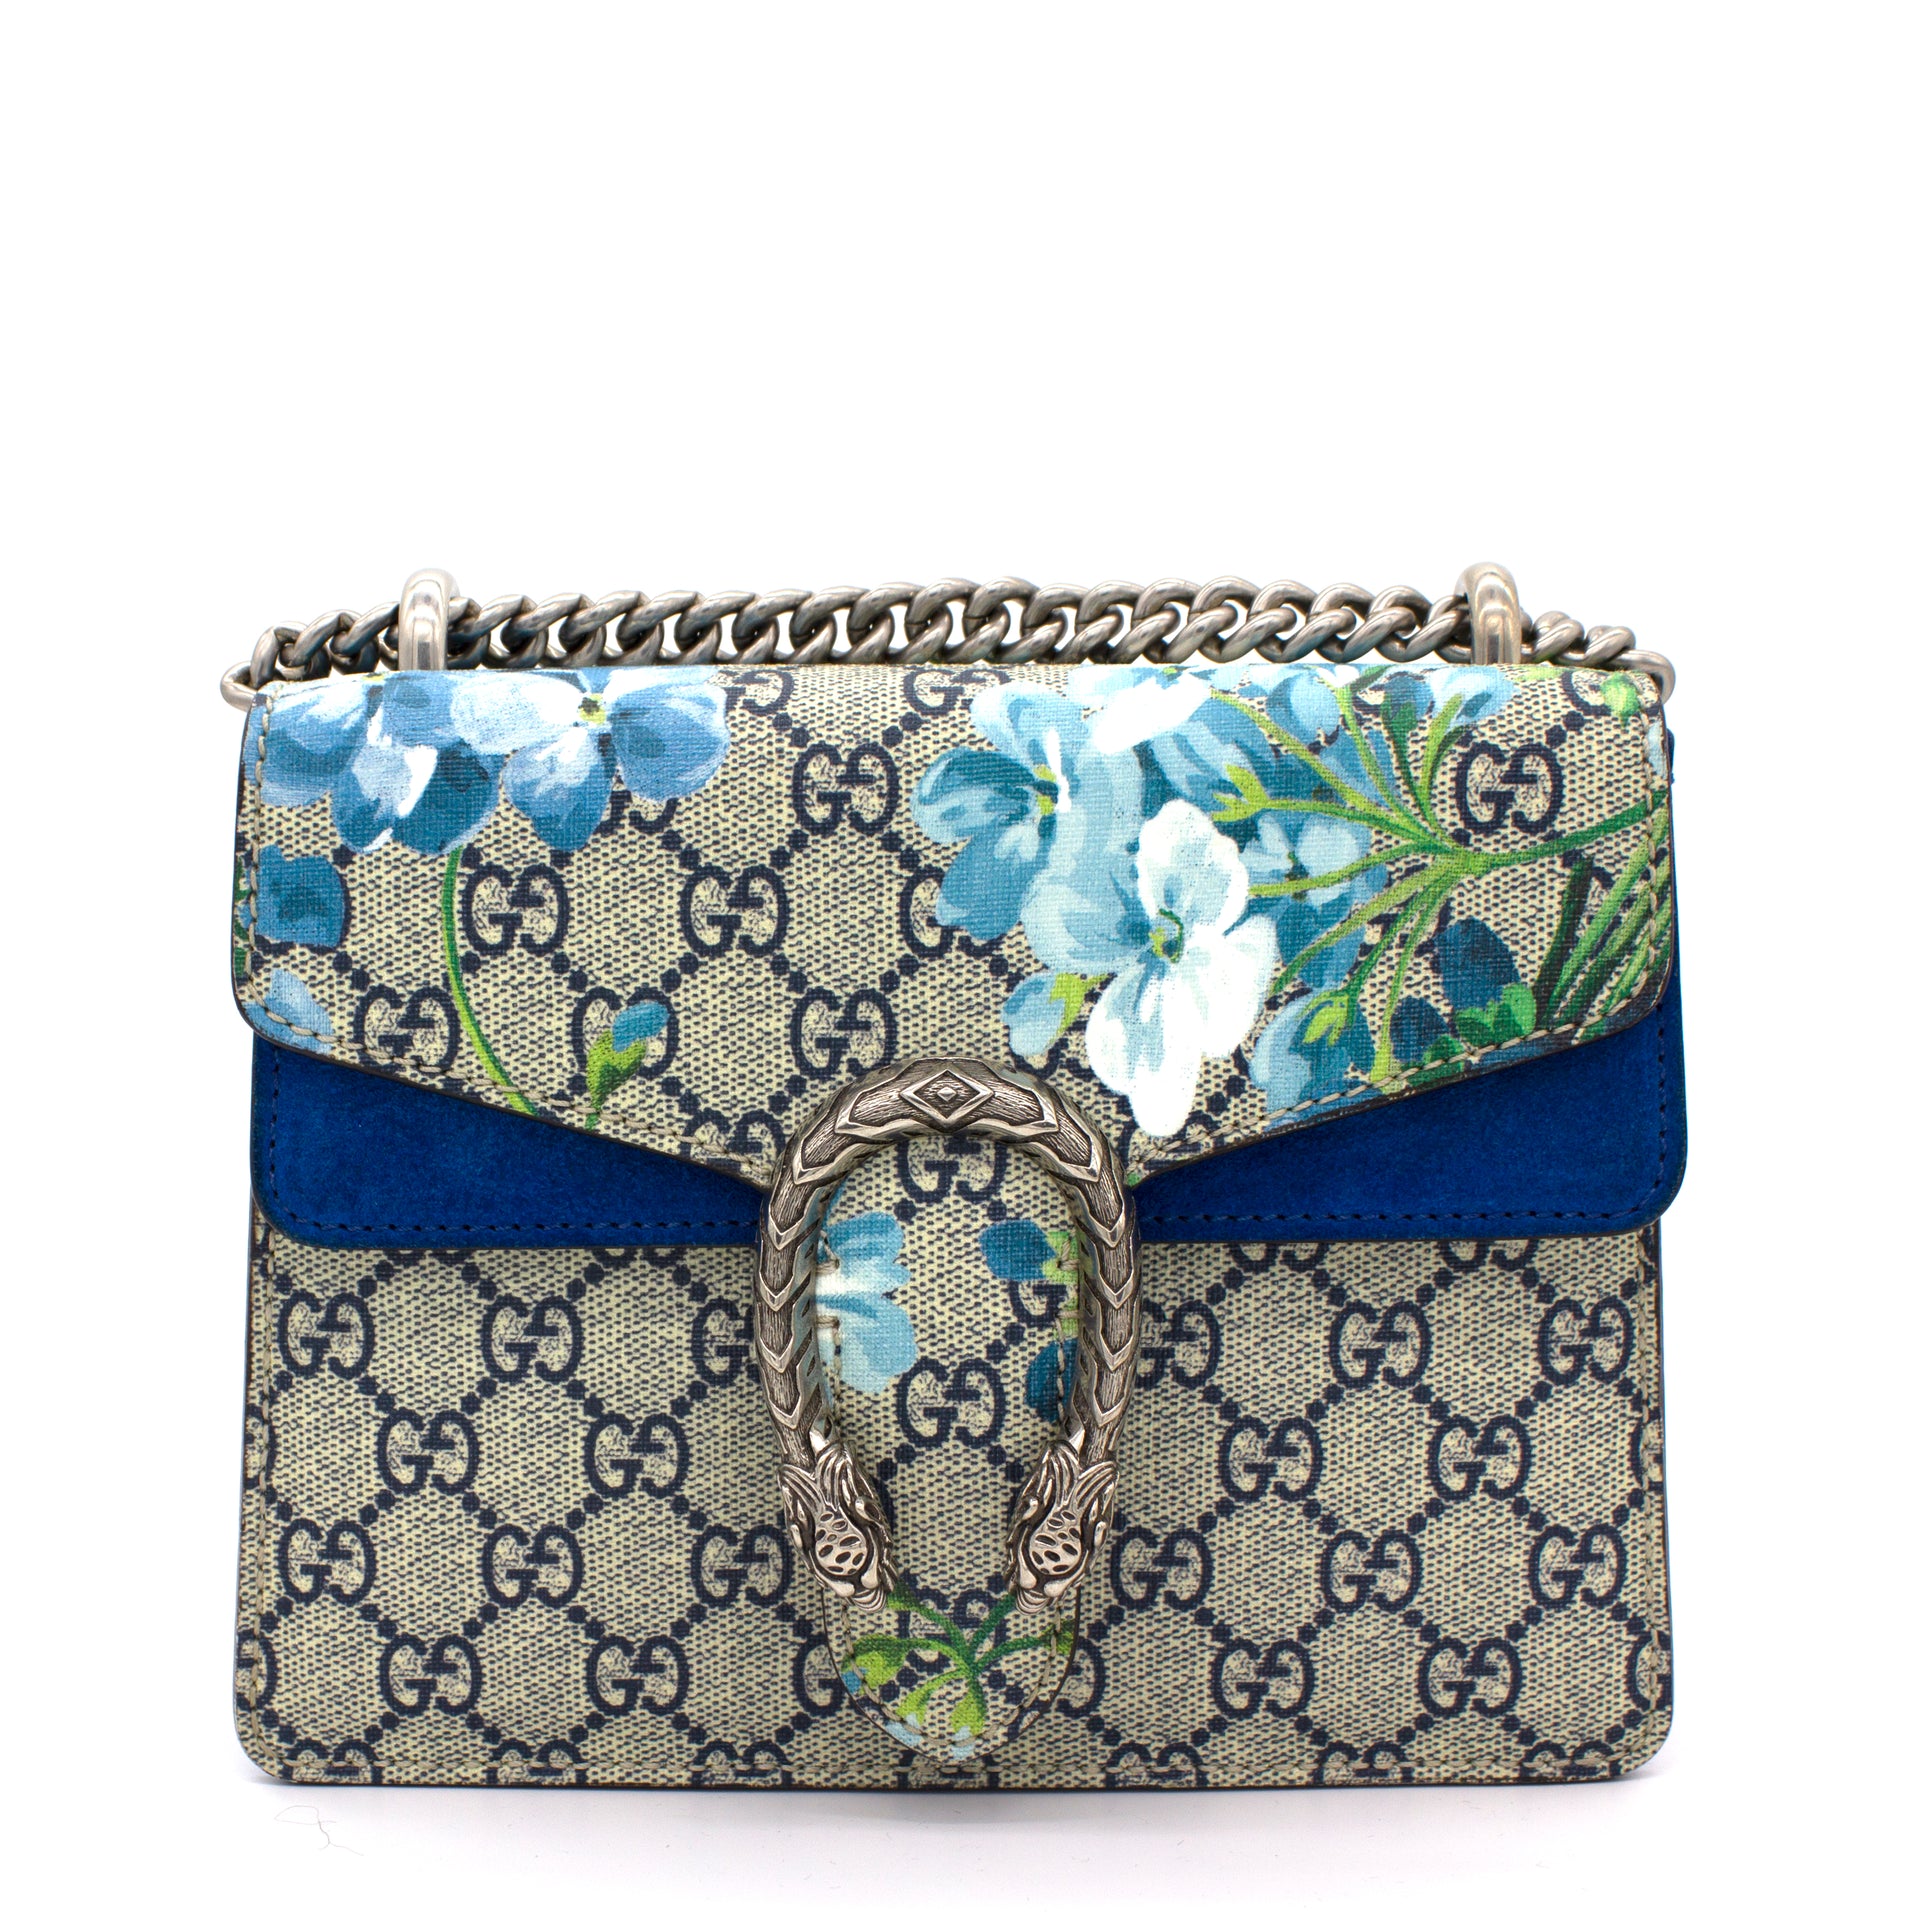 Gucci Calfskin Bee Embroidered Medium Dionysus Shoulder Bag White Blue Hibiscus Red